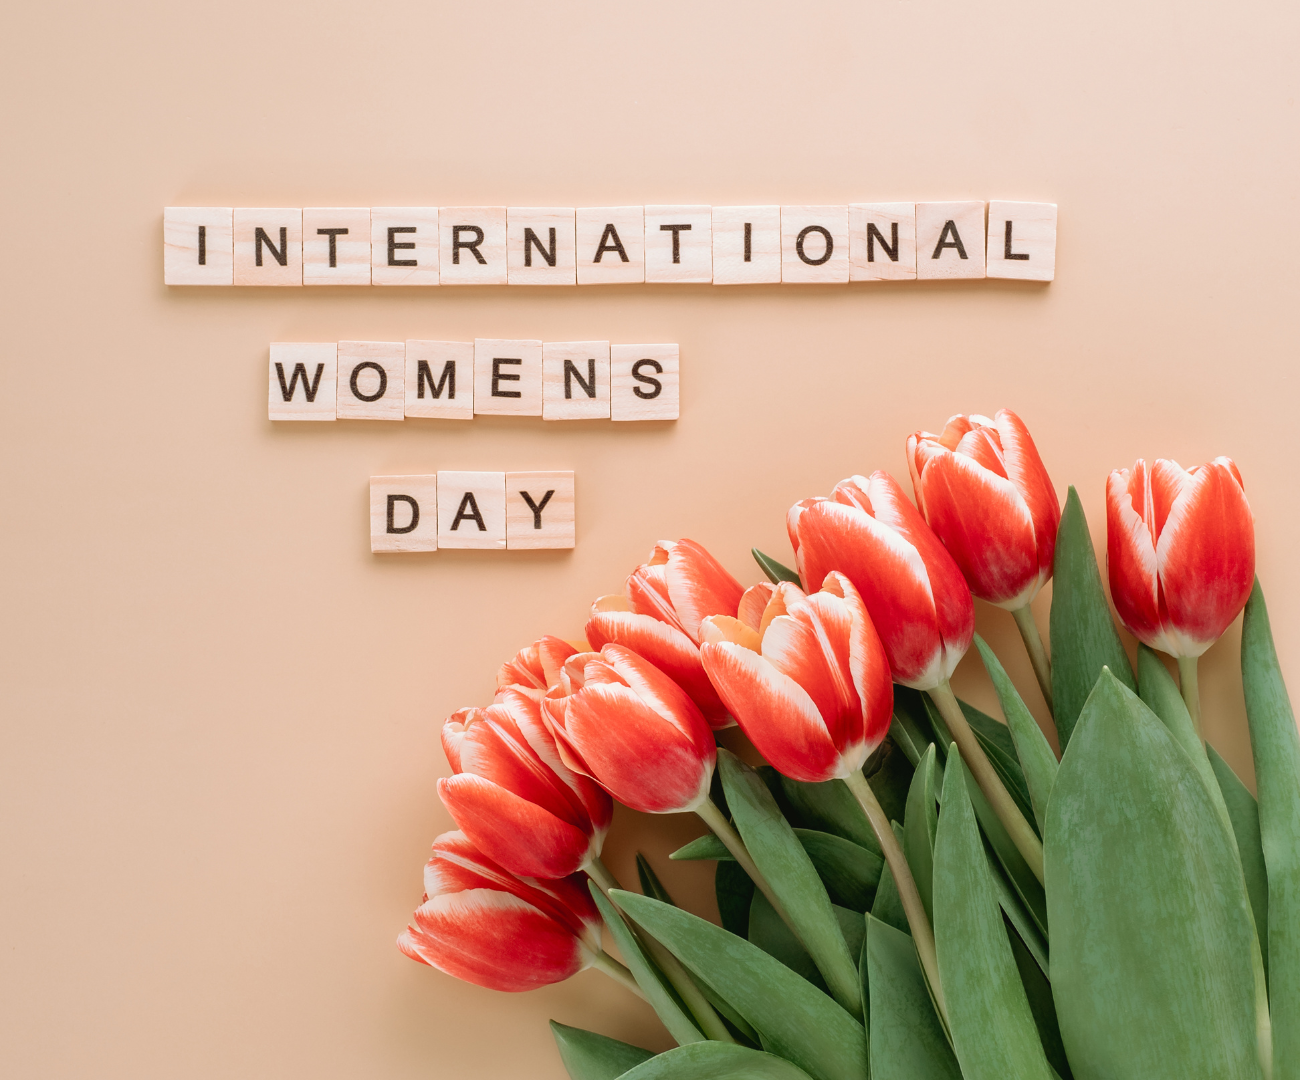 Inspiring quotes to celebrate International Women's Day